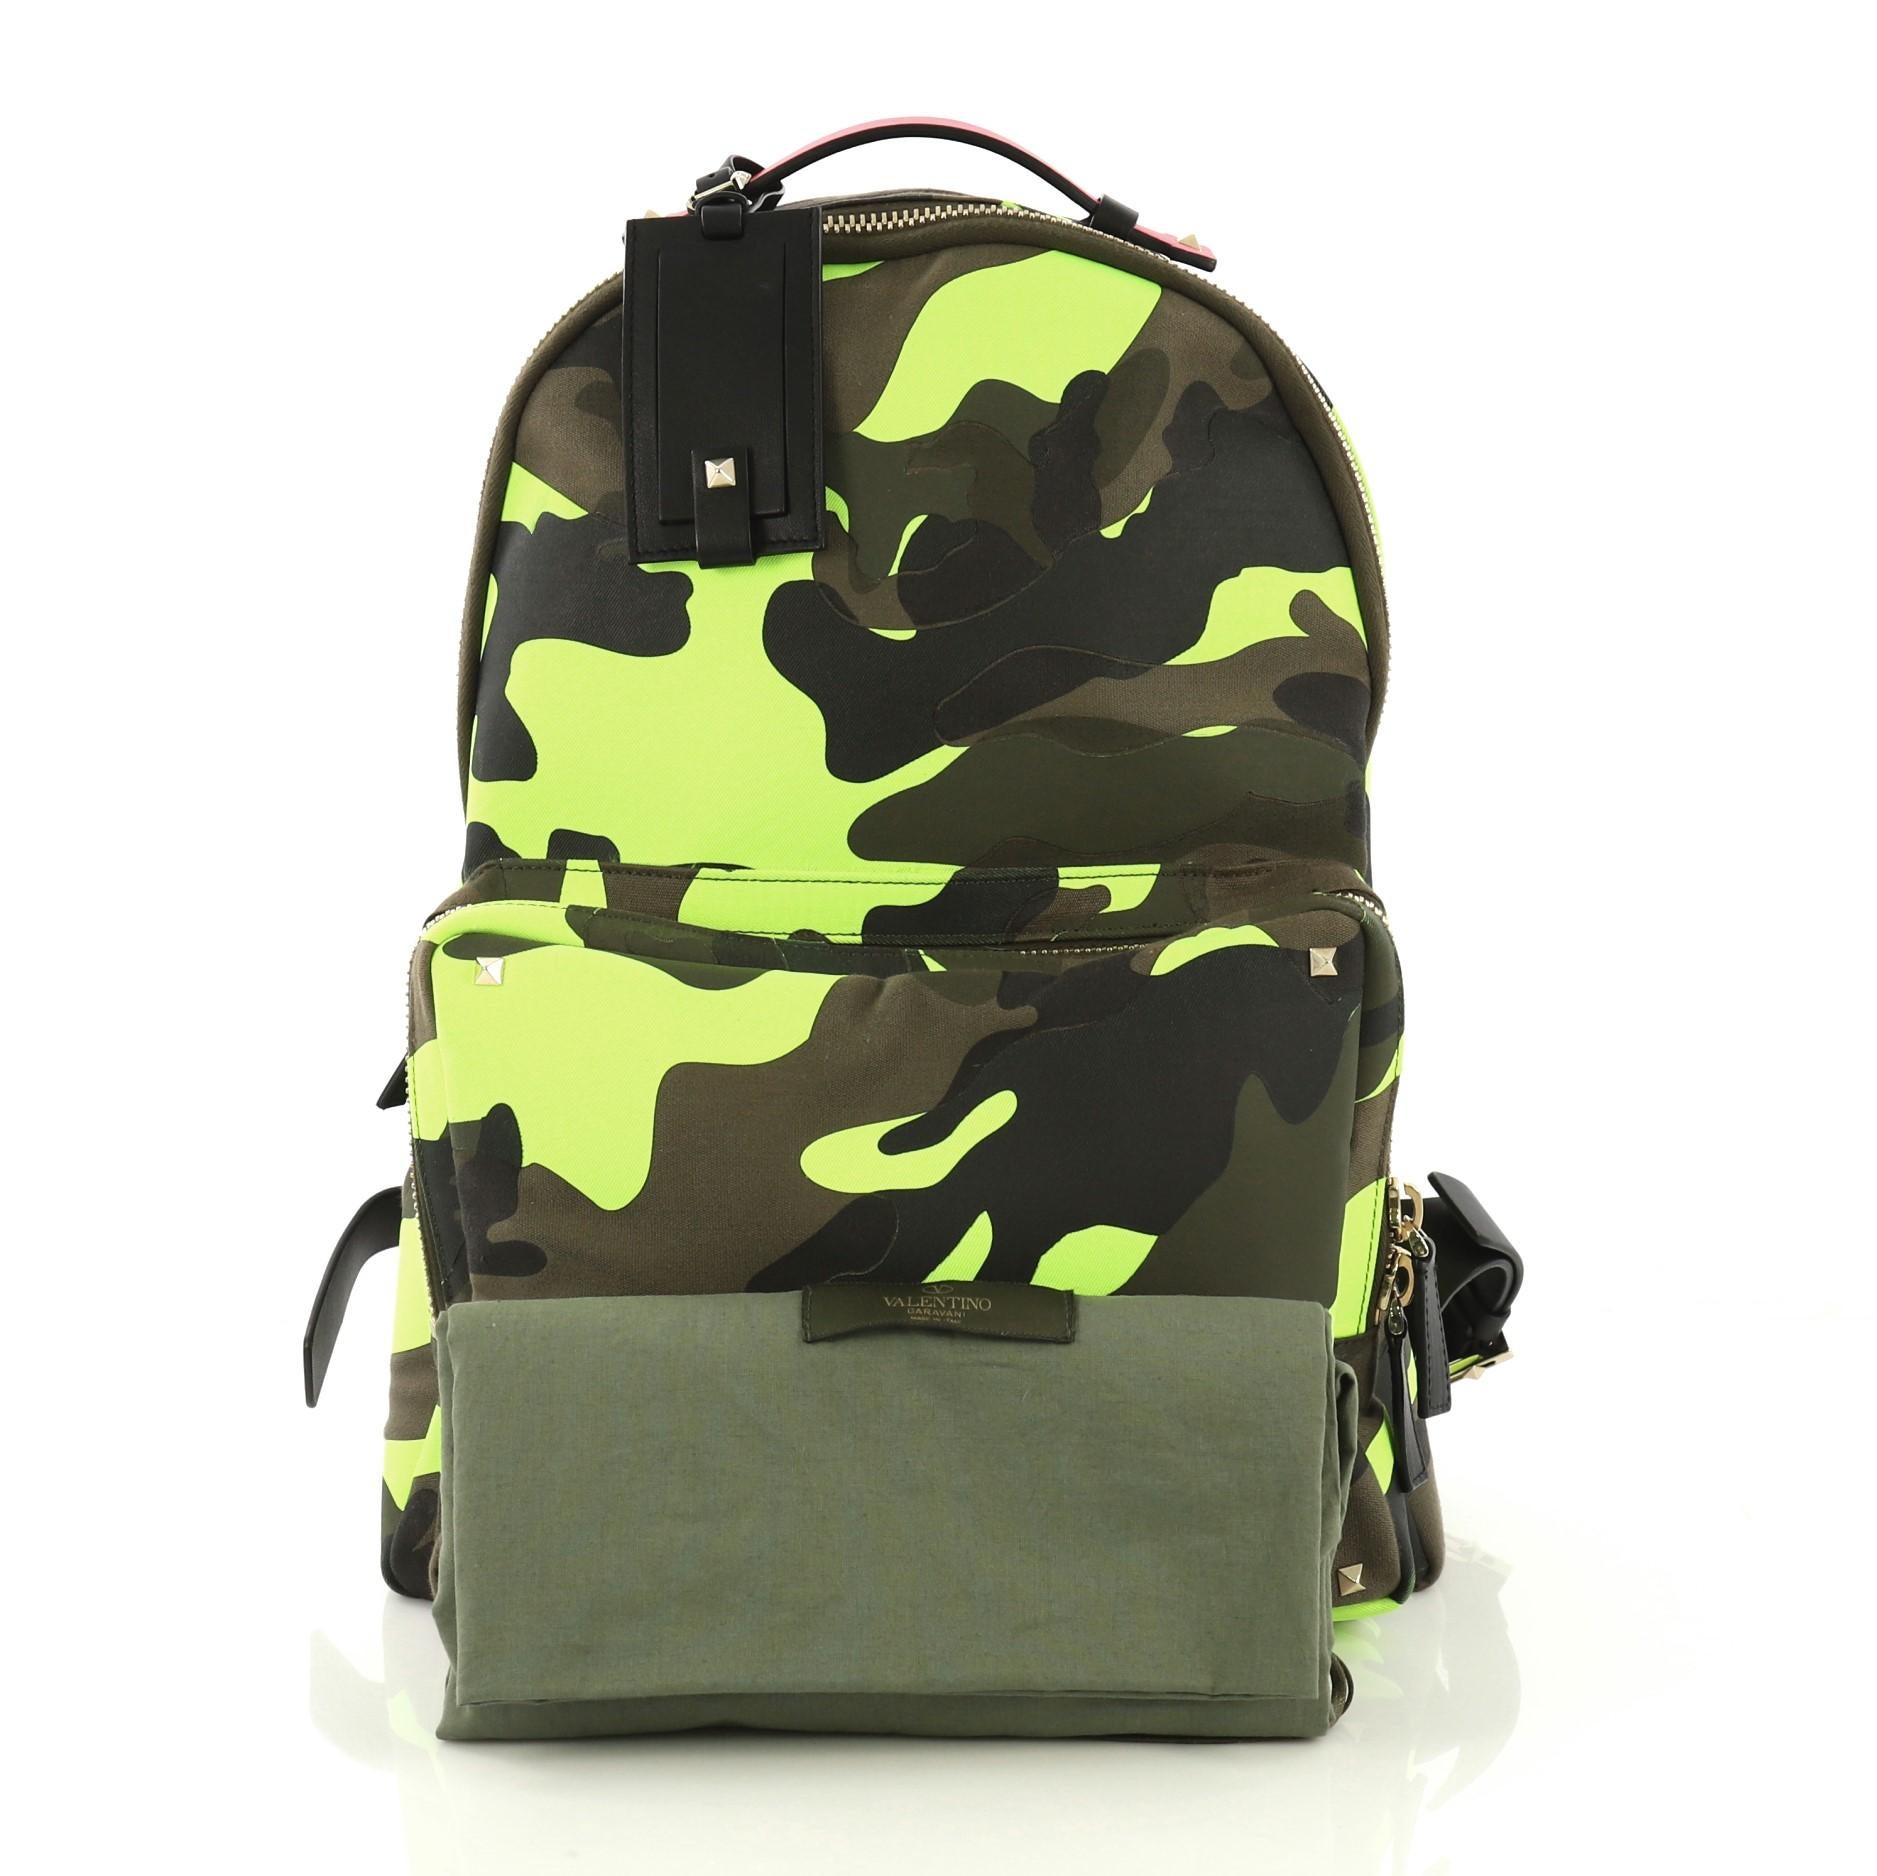 This Valentino Camouflage Backpack Nylon and Leather Large, crafted in green Multicolor Camouflage Nylon and Leather, features dual shoulder straps, stud detailing, exterior front zip pocket and aged gold-tone hardare. Its zip closure opens to a